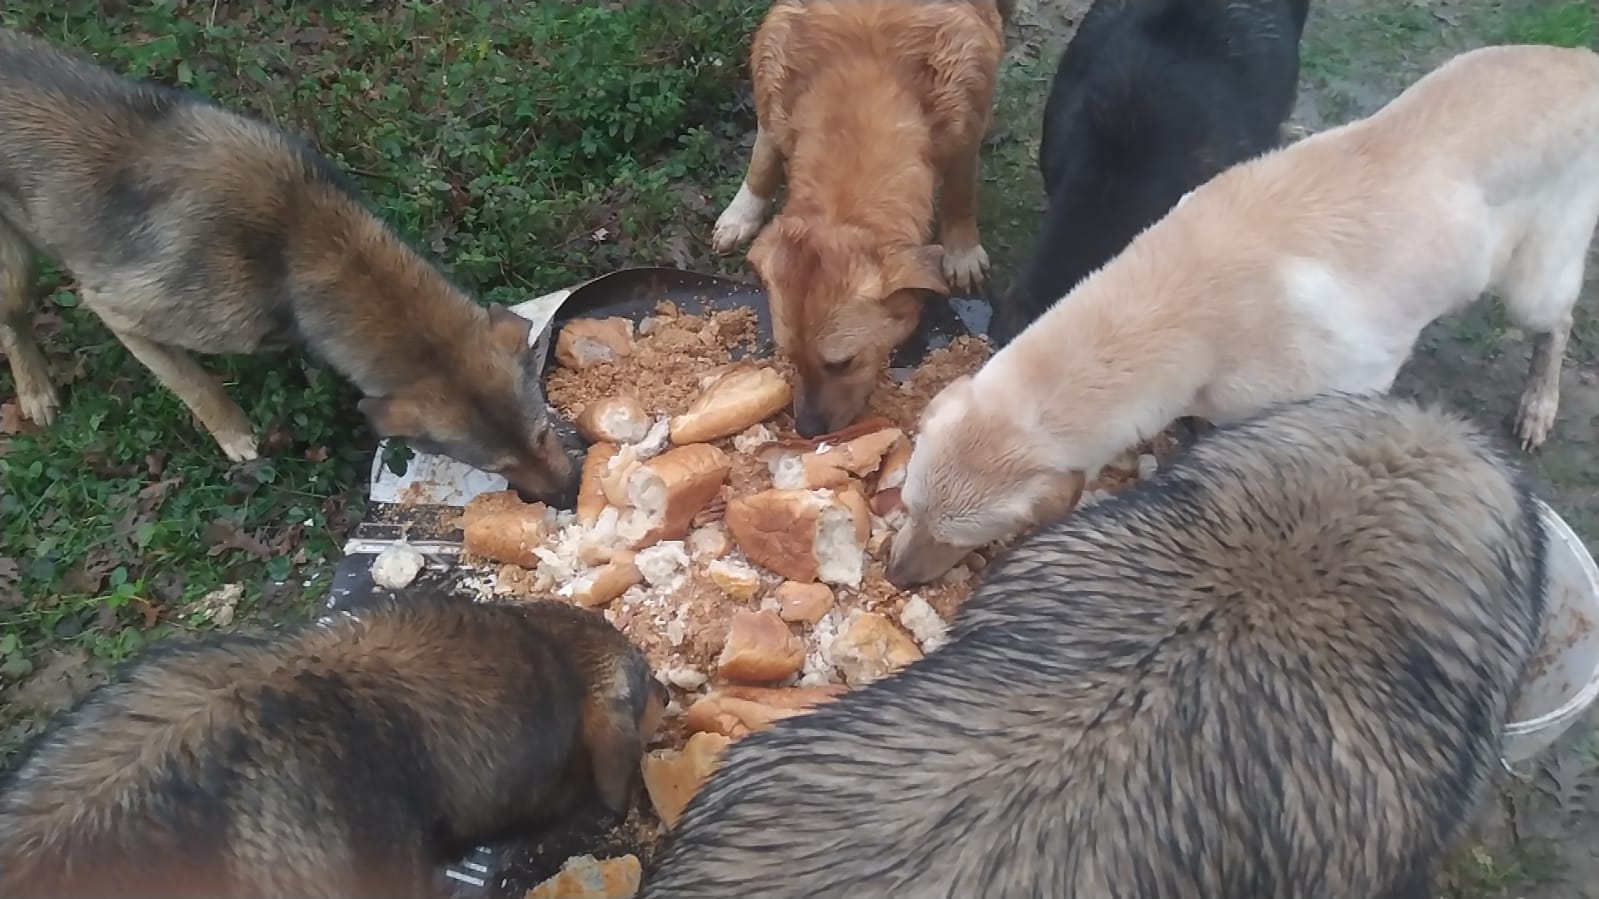 THE LIFE OF A STRAY IN ISTANBUL KURTKOY FOREST. OIPA TURKEY FEEDS AND LOOKS  AFTER 500 HOMELESS DOGS | OIPA